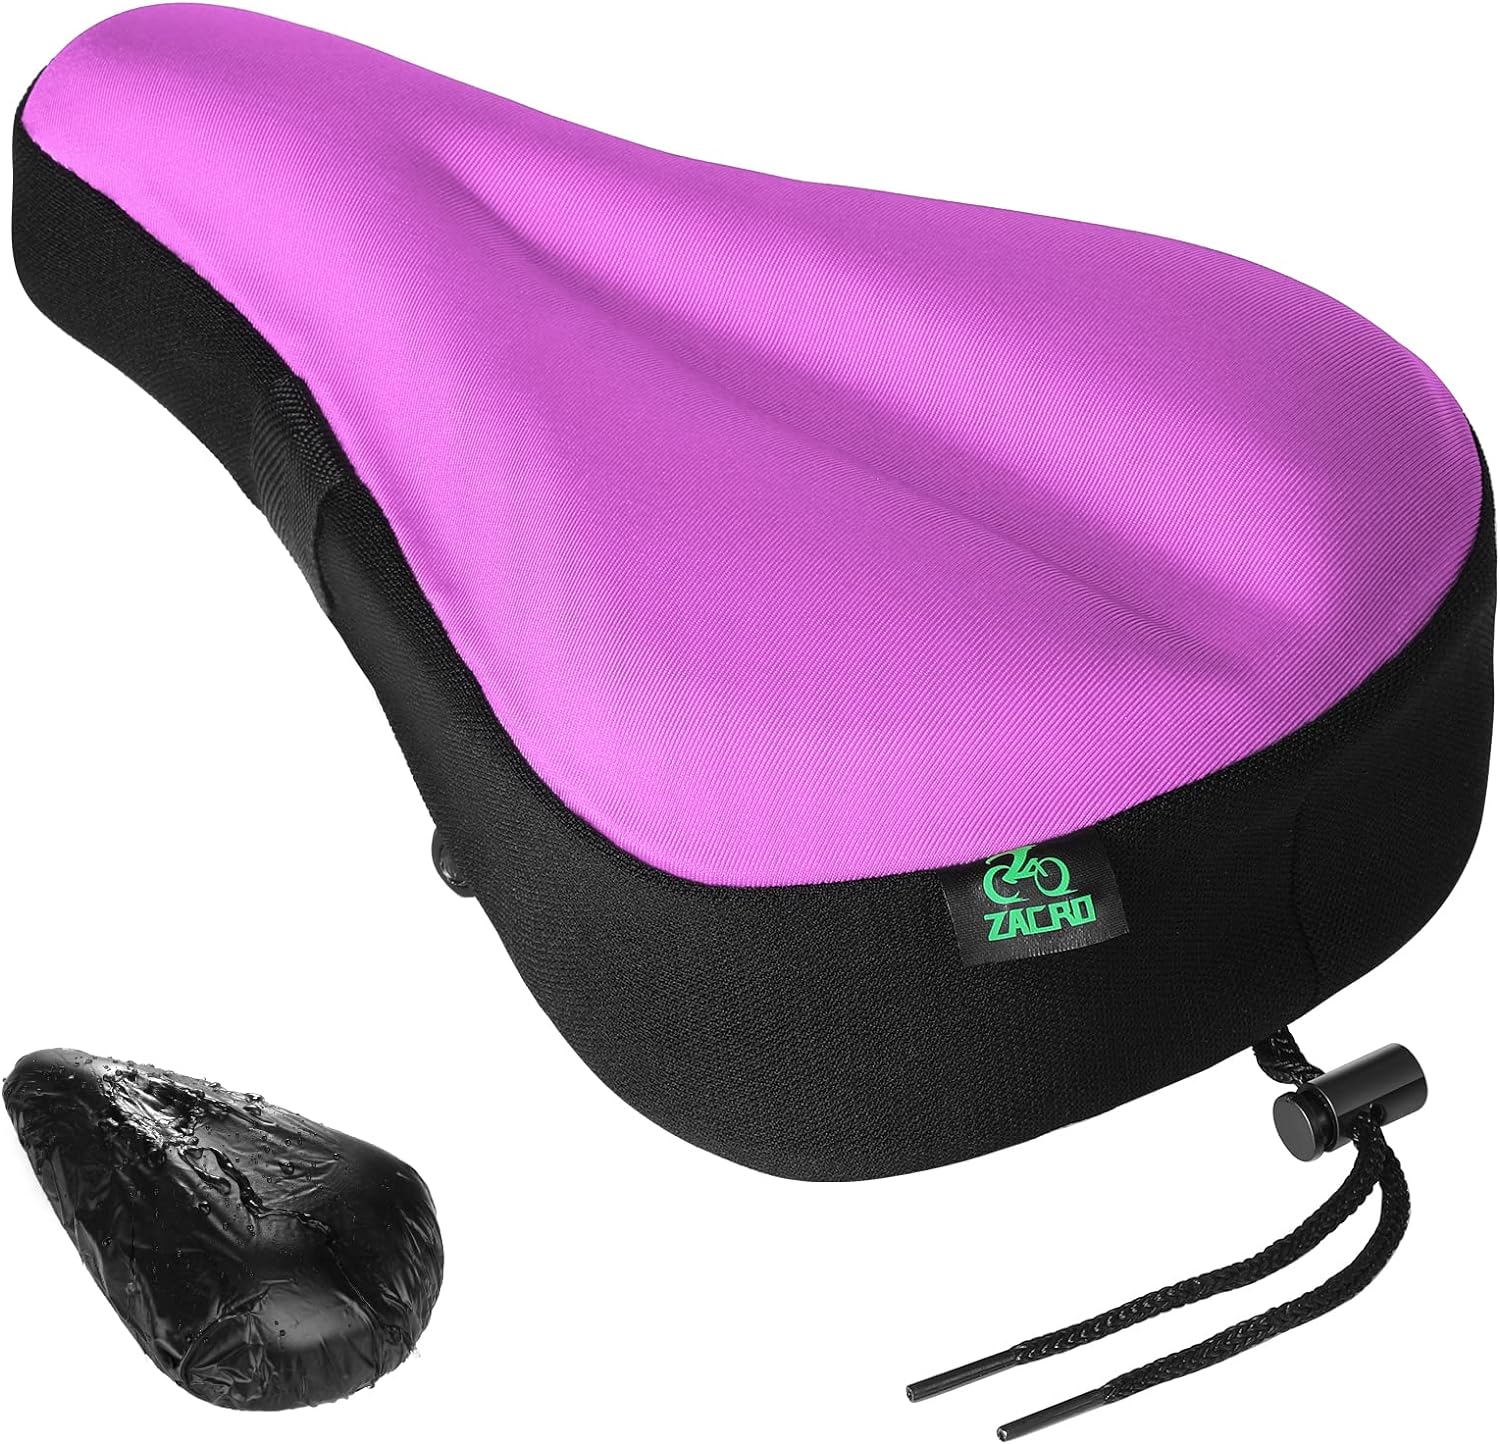 Purple Zacro Exercise Bike Seat Cushion - Large Gel Bike Seat Cover Extra  Comfort, Compatible With Indoor Bike, Spin Bike, Exercise Bike, Stationary  B